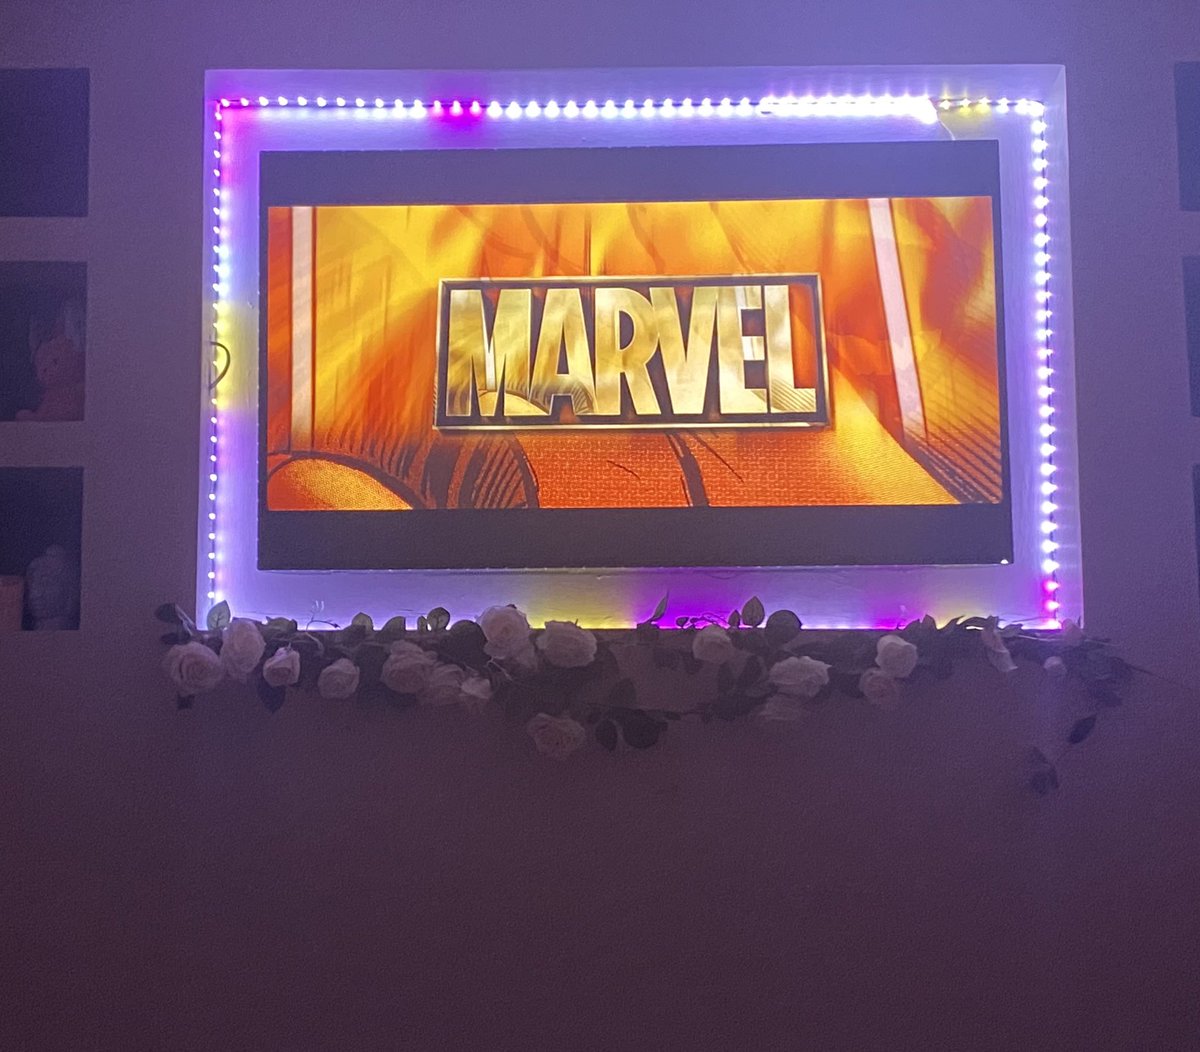 Spent the past week or so working through the Marvel timeline. Only seen guardians, end game, black panther so thought I’d watch all start to finish.. such a good idea, love thor, love the captain america movies too! Whats your fave? https://t.co/be6m5zDf3r